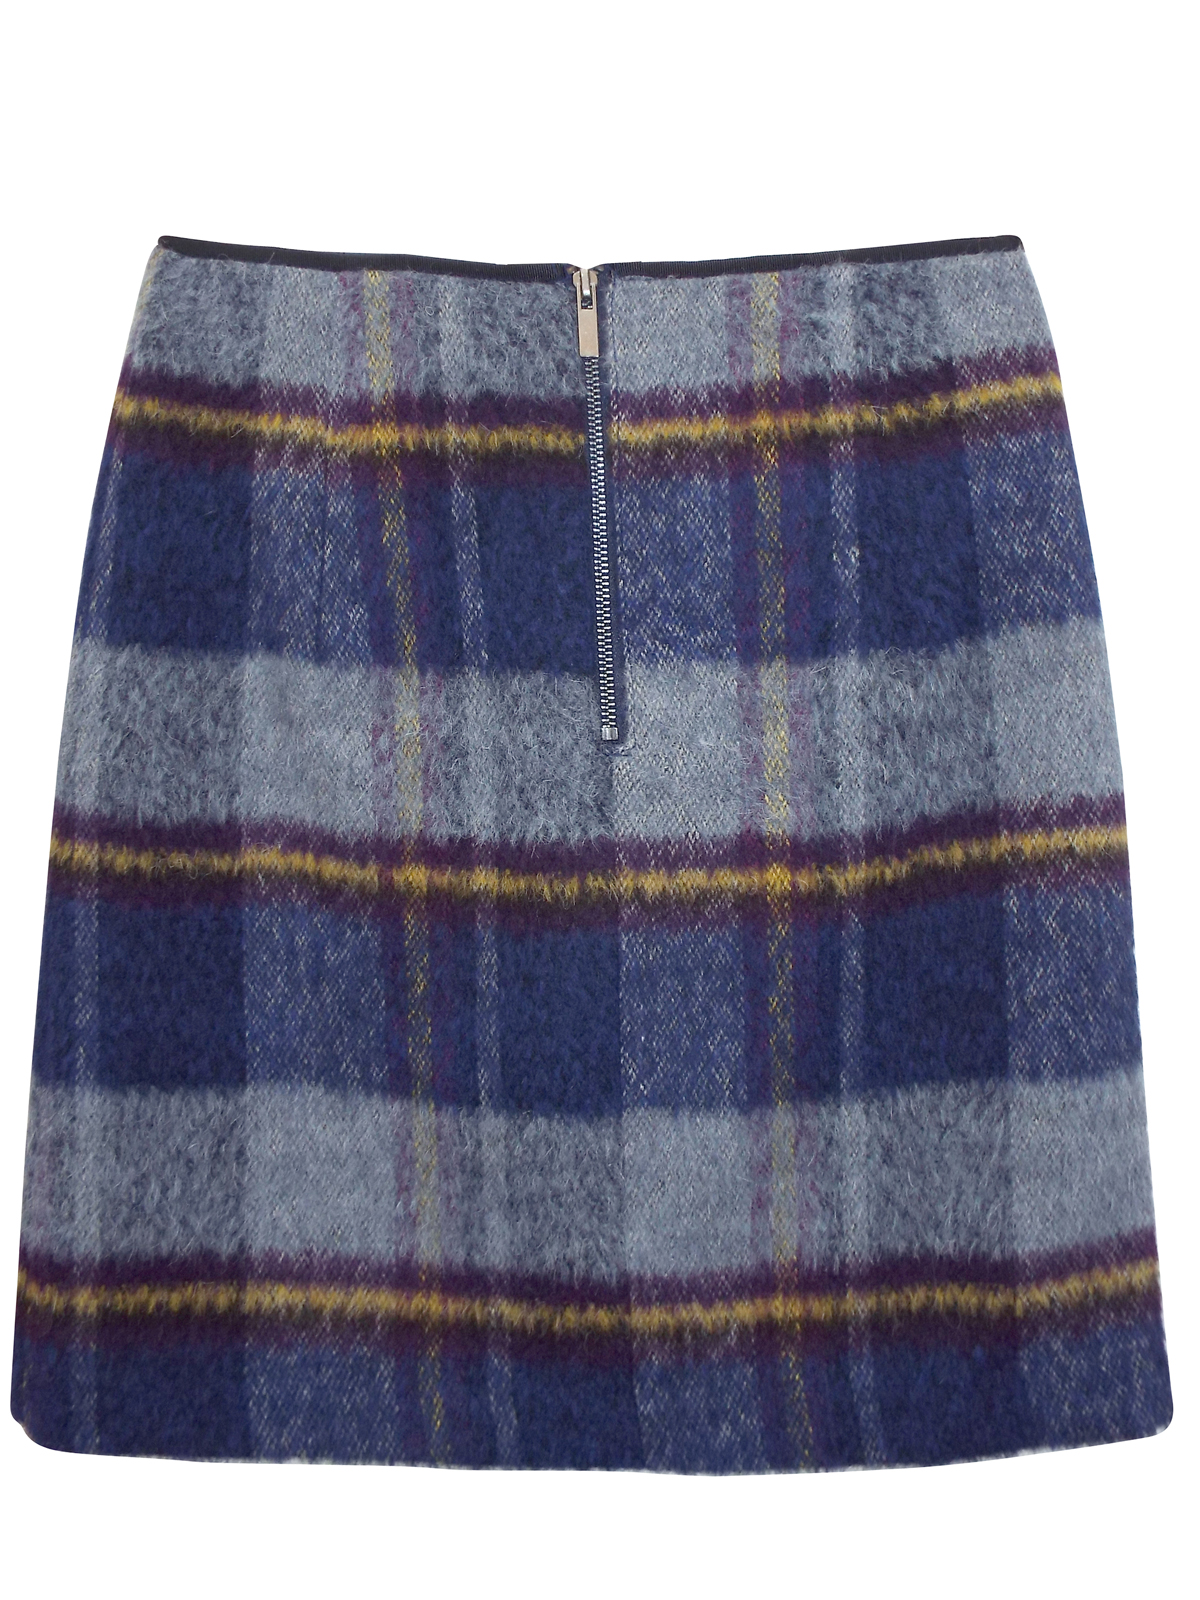 Marks and Spencer - - M&5 BLUE Checked Mini Skirt with Wool - Size 8 to 16